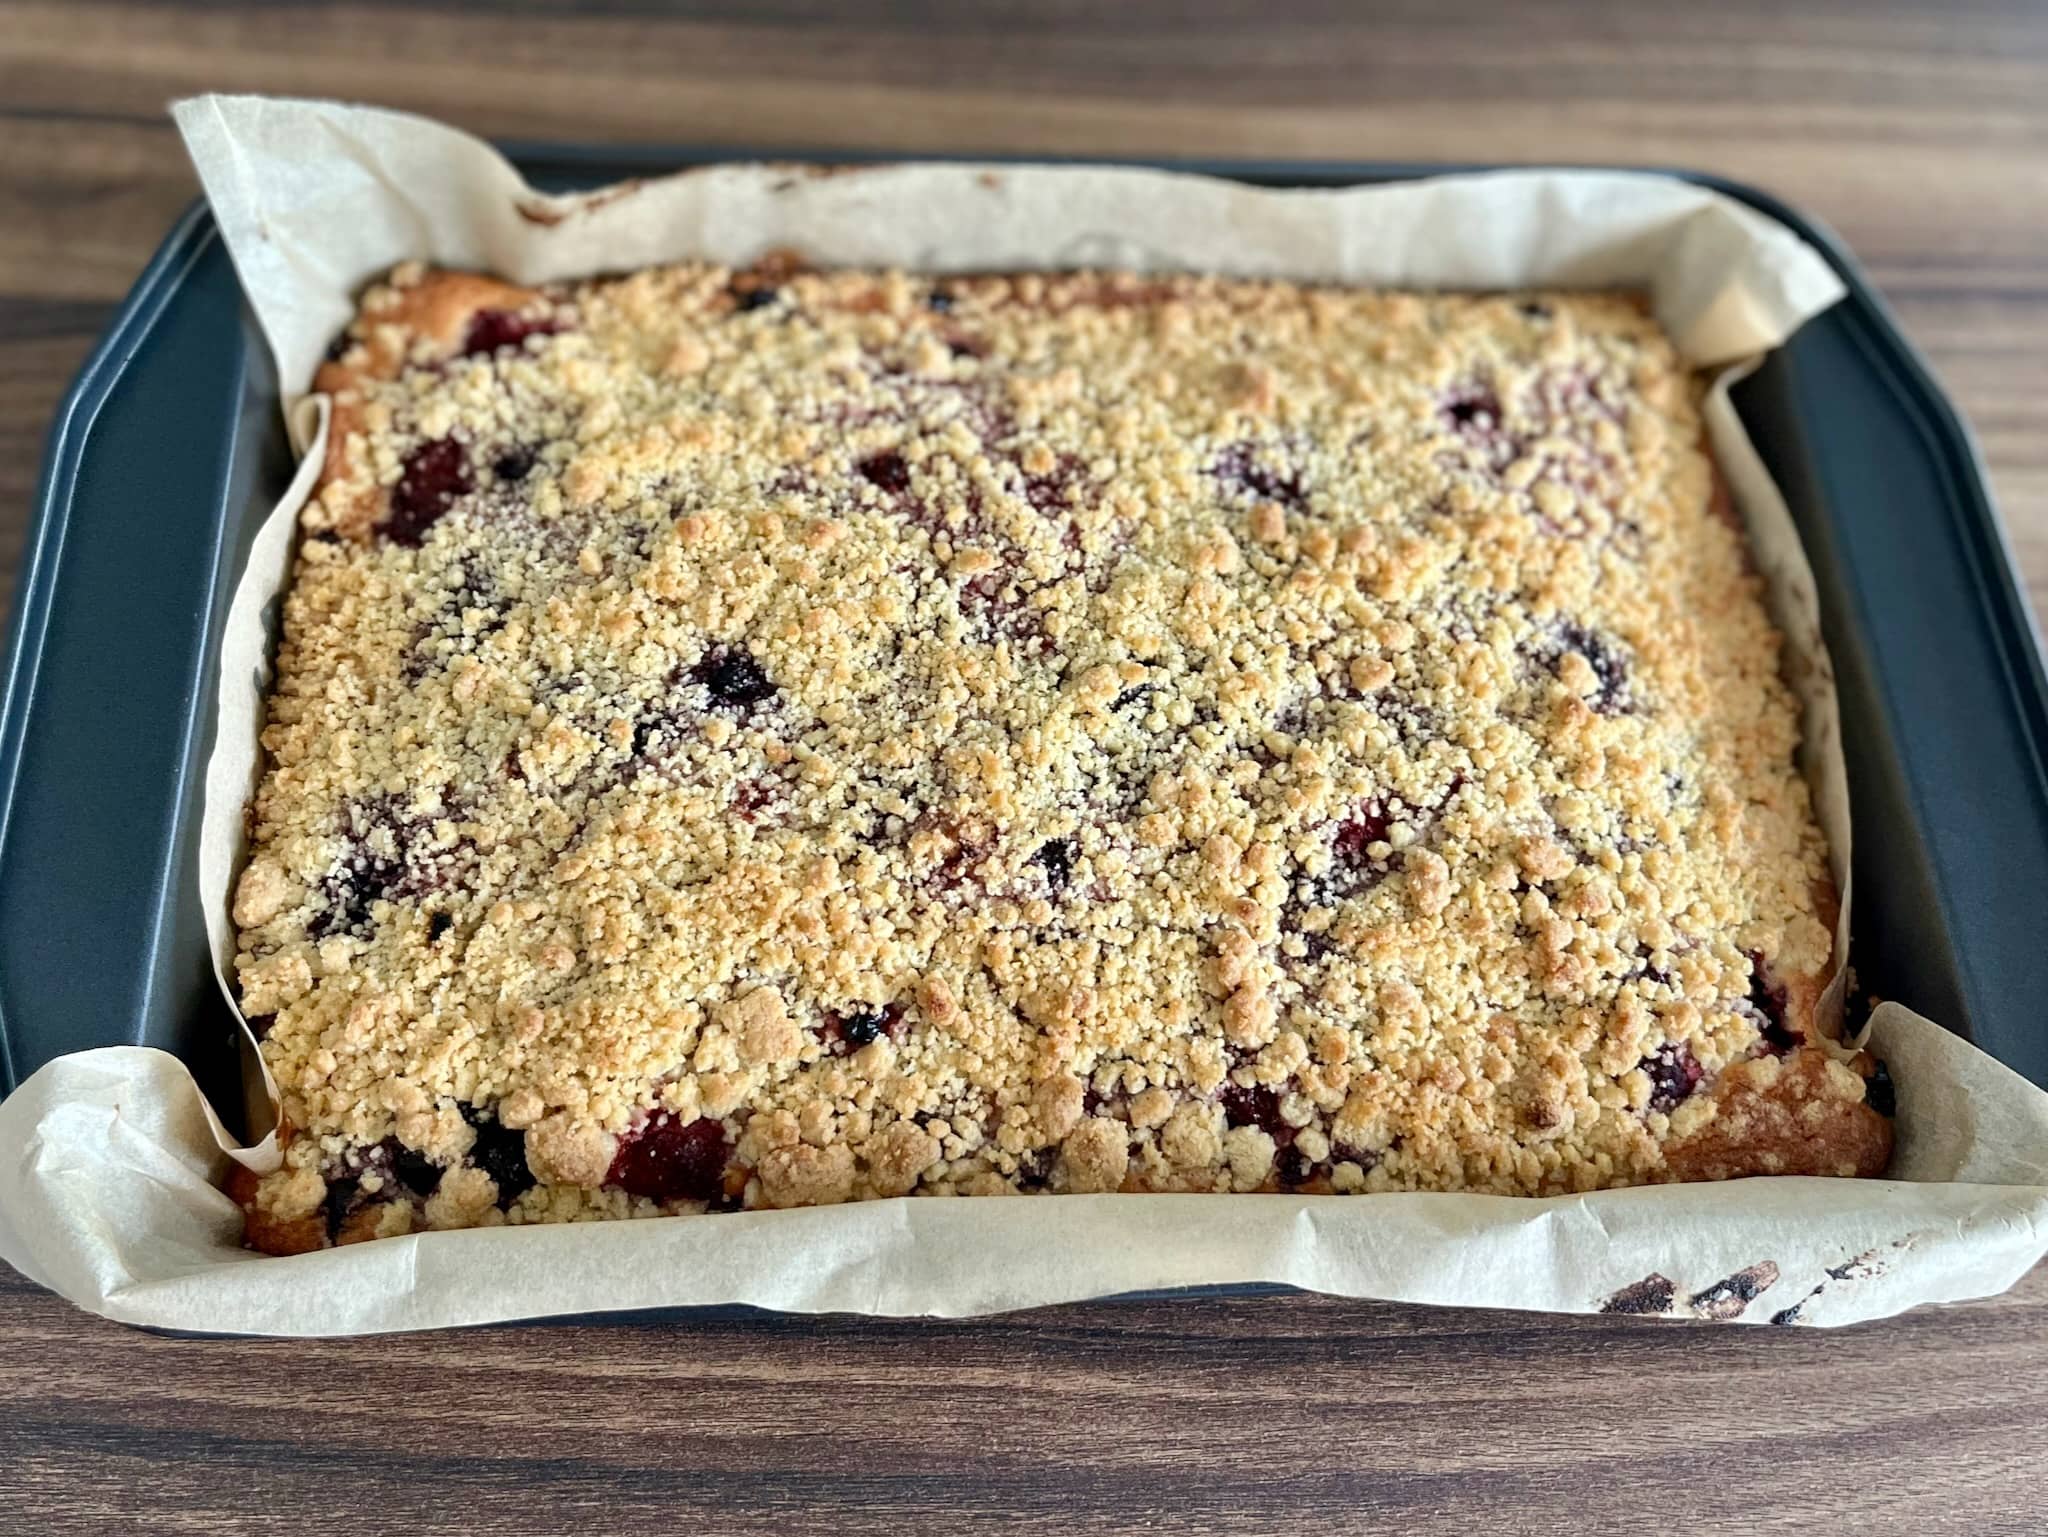 A beautifully baked Summer Berry Crumble Cake, straight from the oven